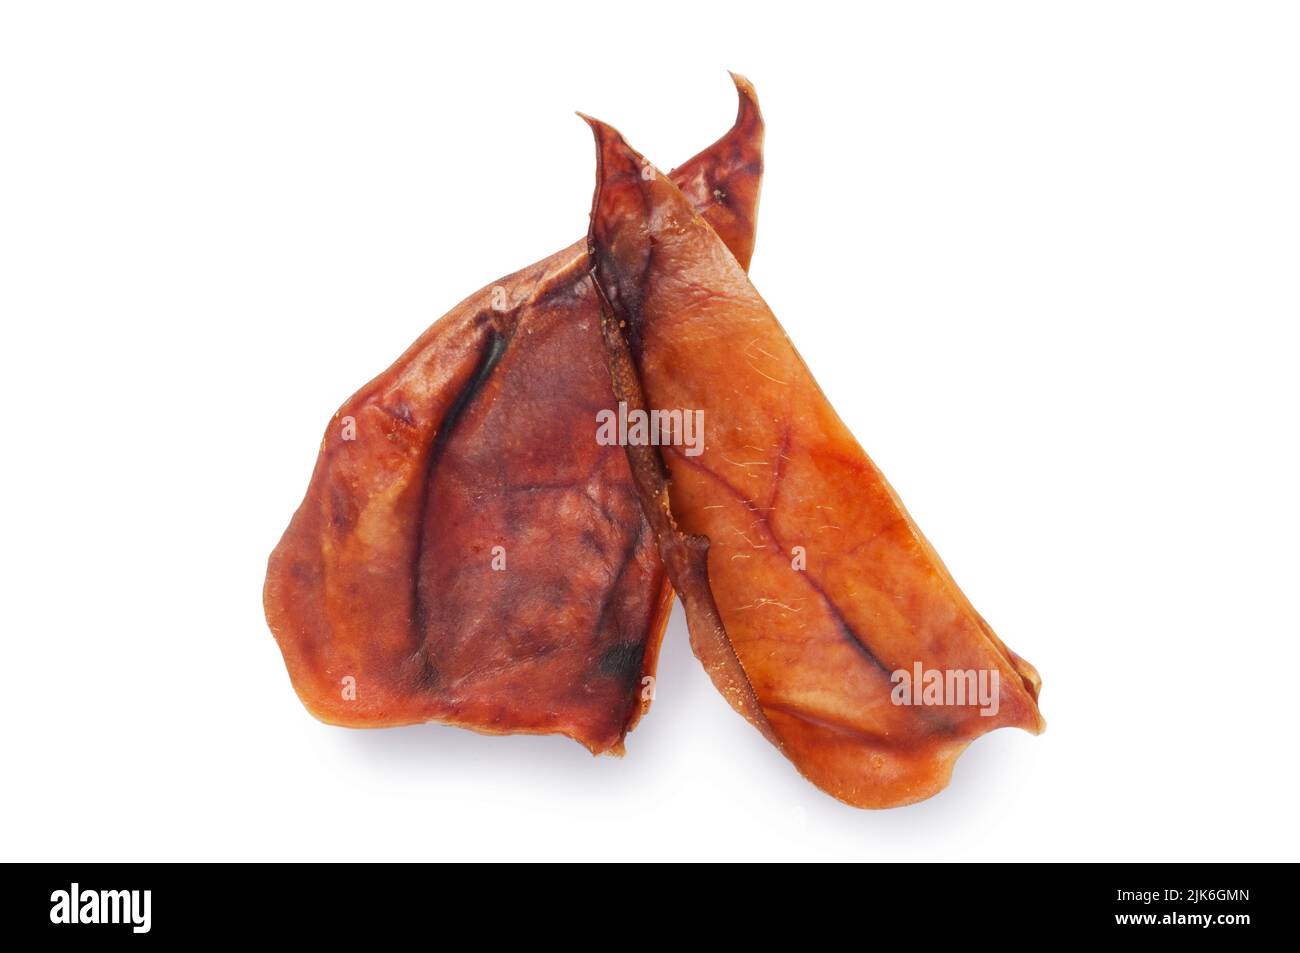 Studio shot of pigs ears, commonly used as a dog treat, cut out against a white background - John Gollop Stock Photo